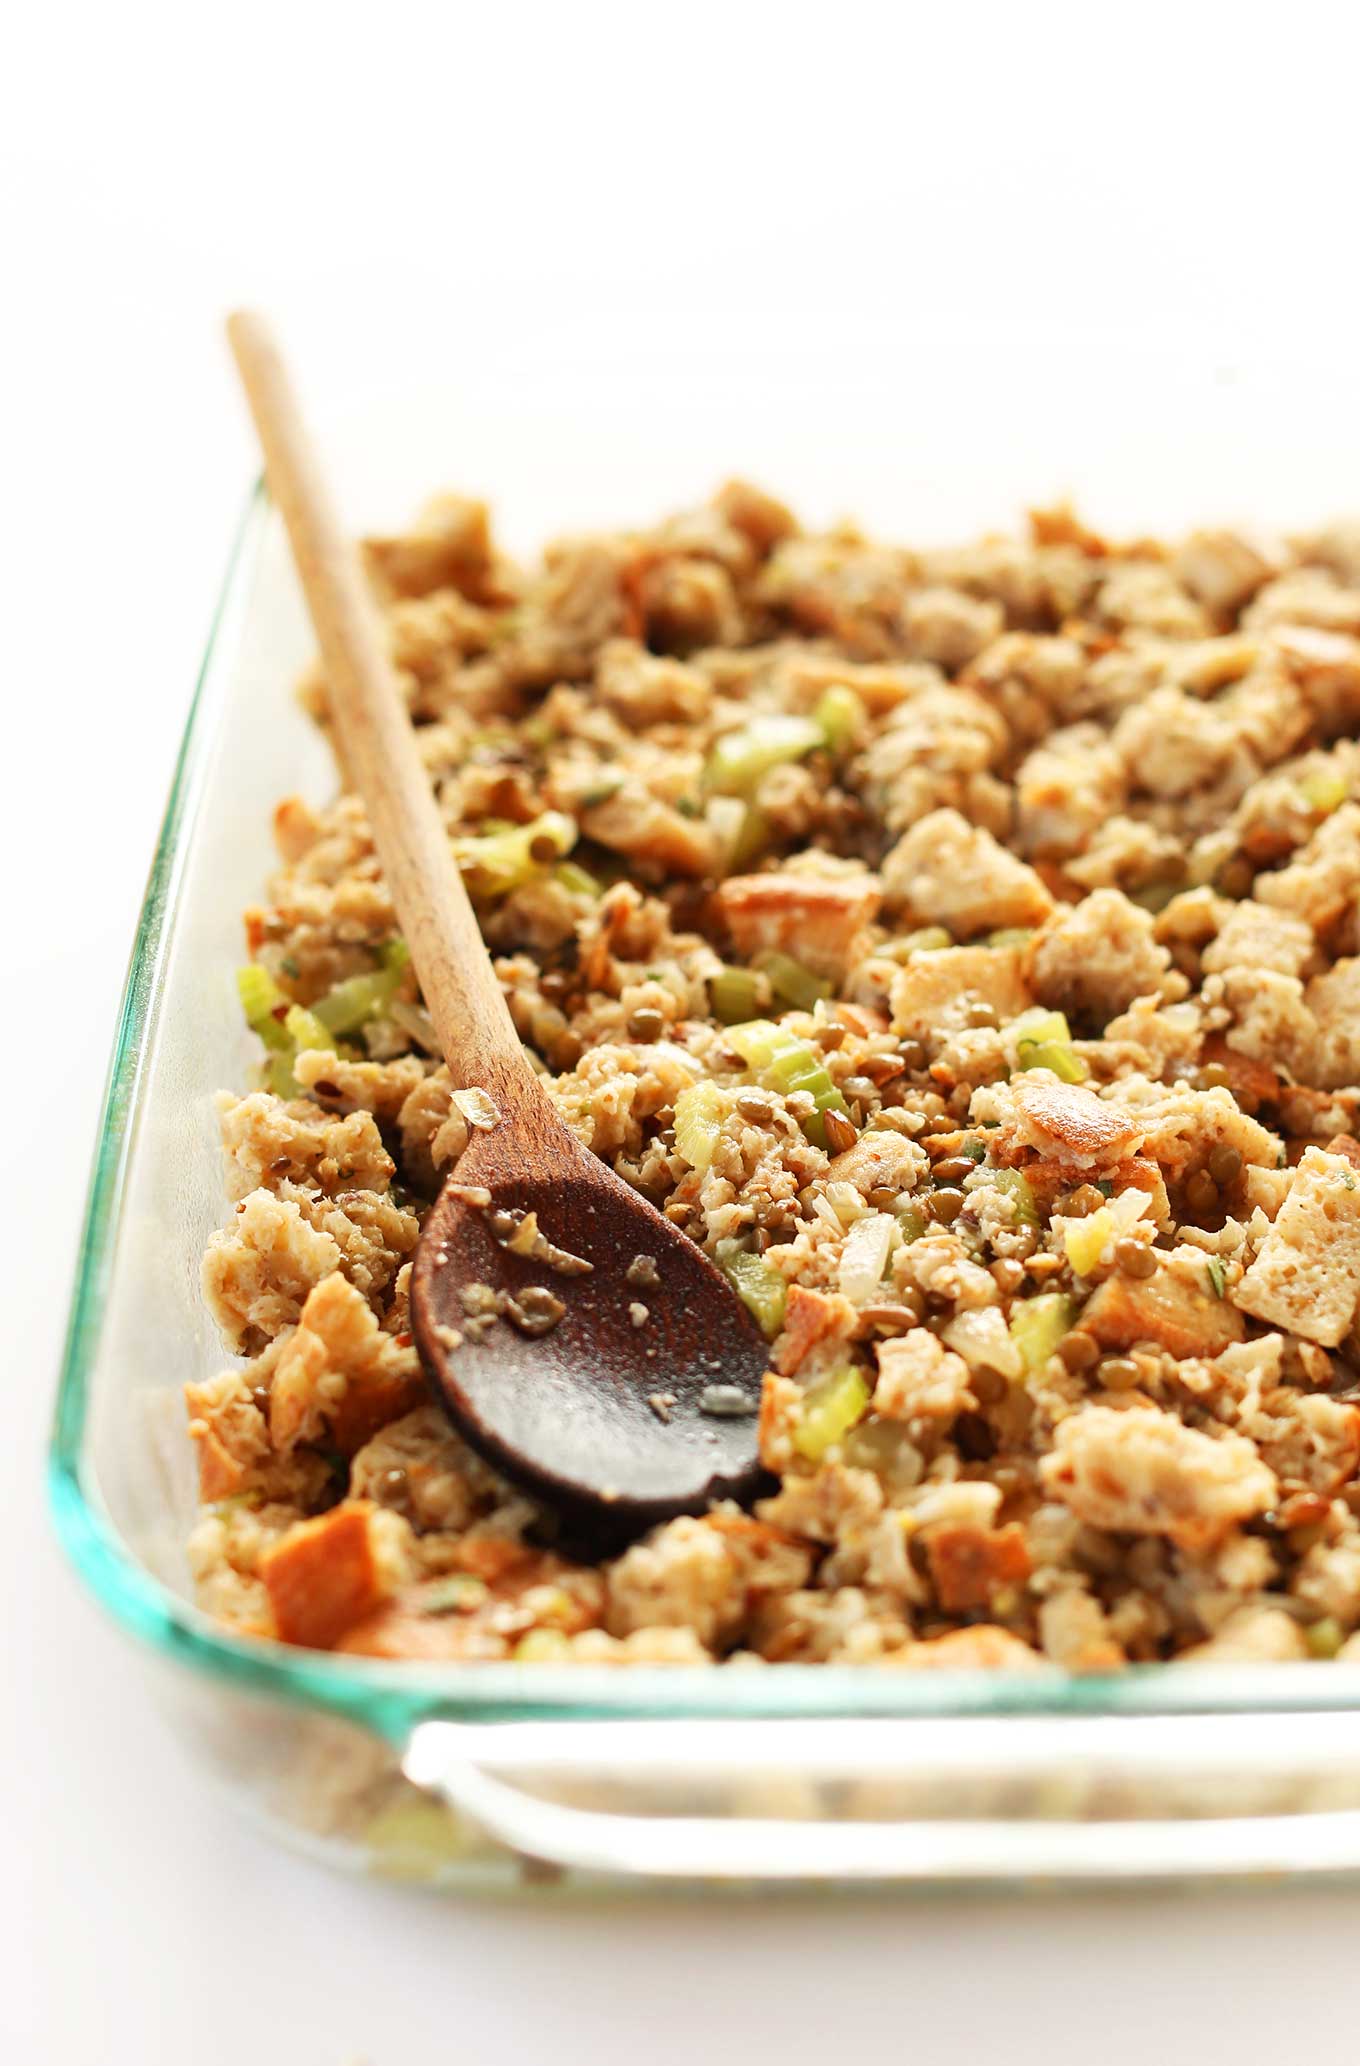 SIMPLE Vegan Stuffing, loaded with fiber and protein and perfect for Thanksgiving and fall meals #vegan #minimalistbaker